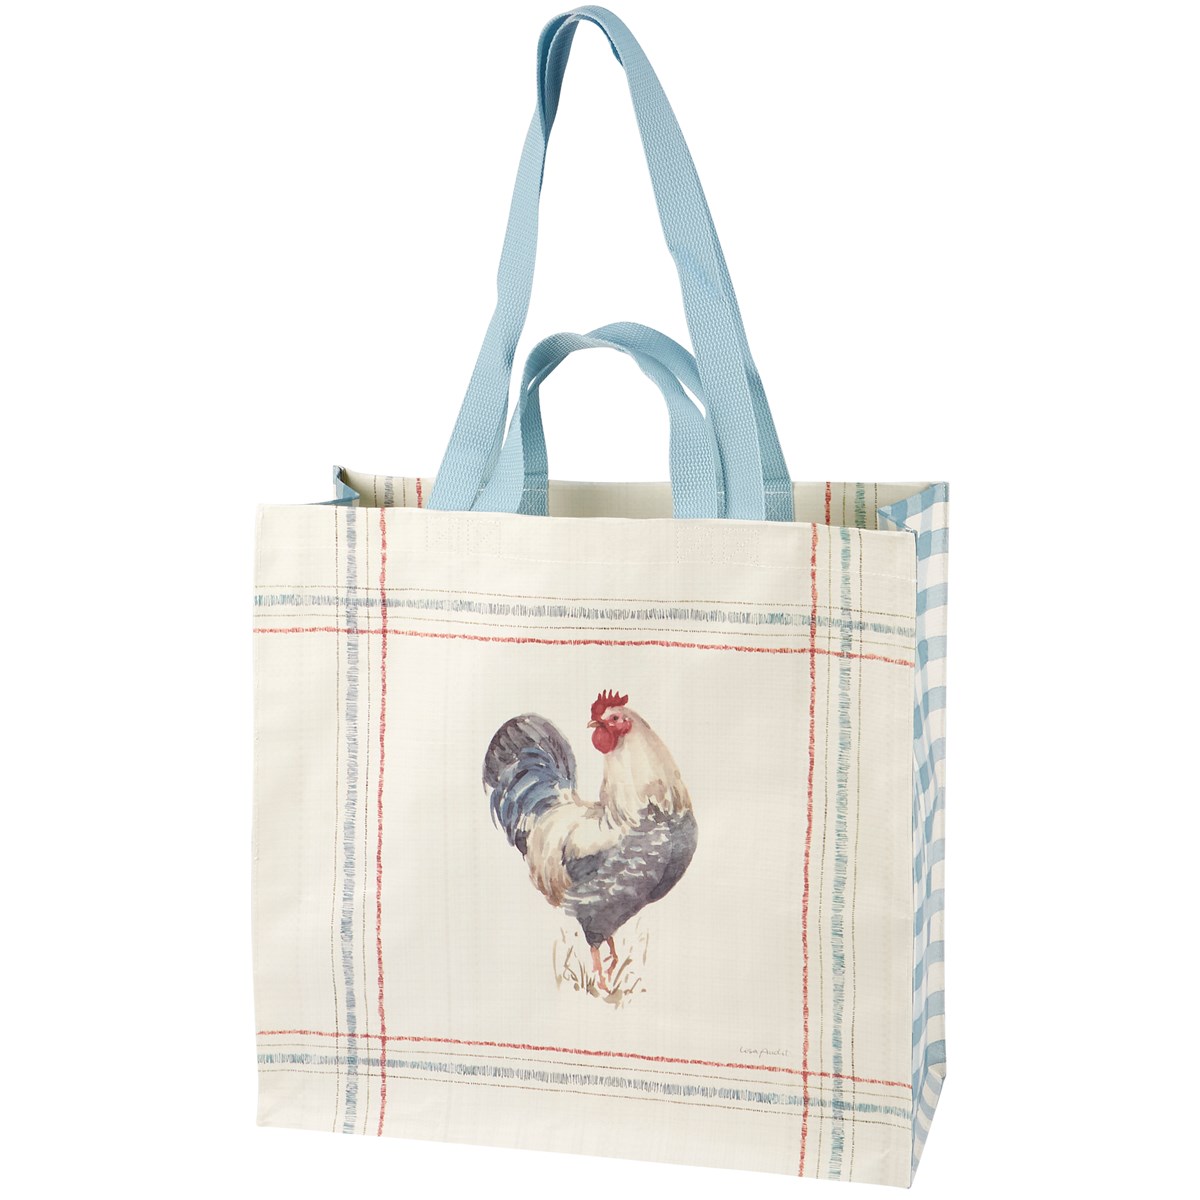 Rooster Market Tote - Post-Consumer Material, Nylon